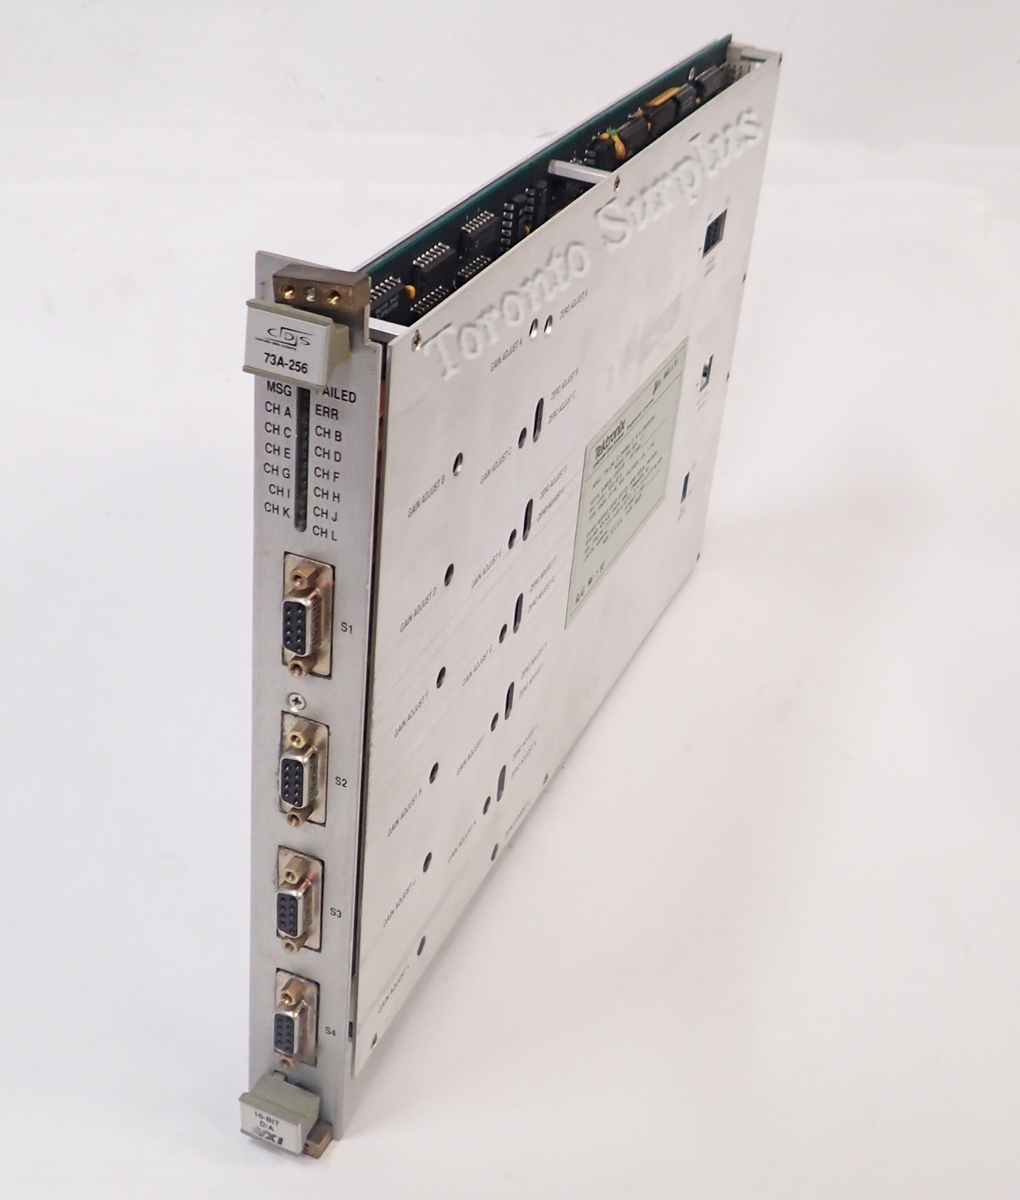 Tektronix / Colorado Data Systems 73A-256 12 Channel D to A Converter Module 1